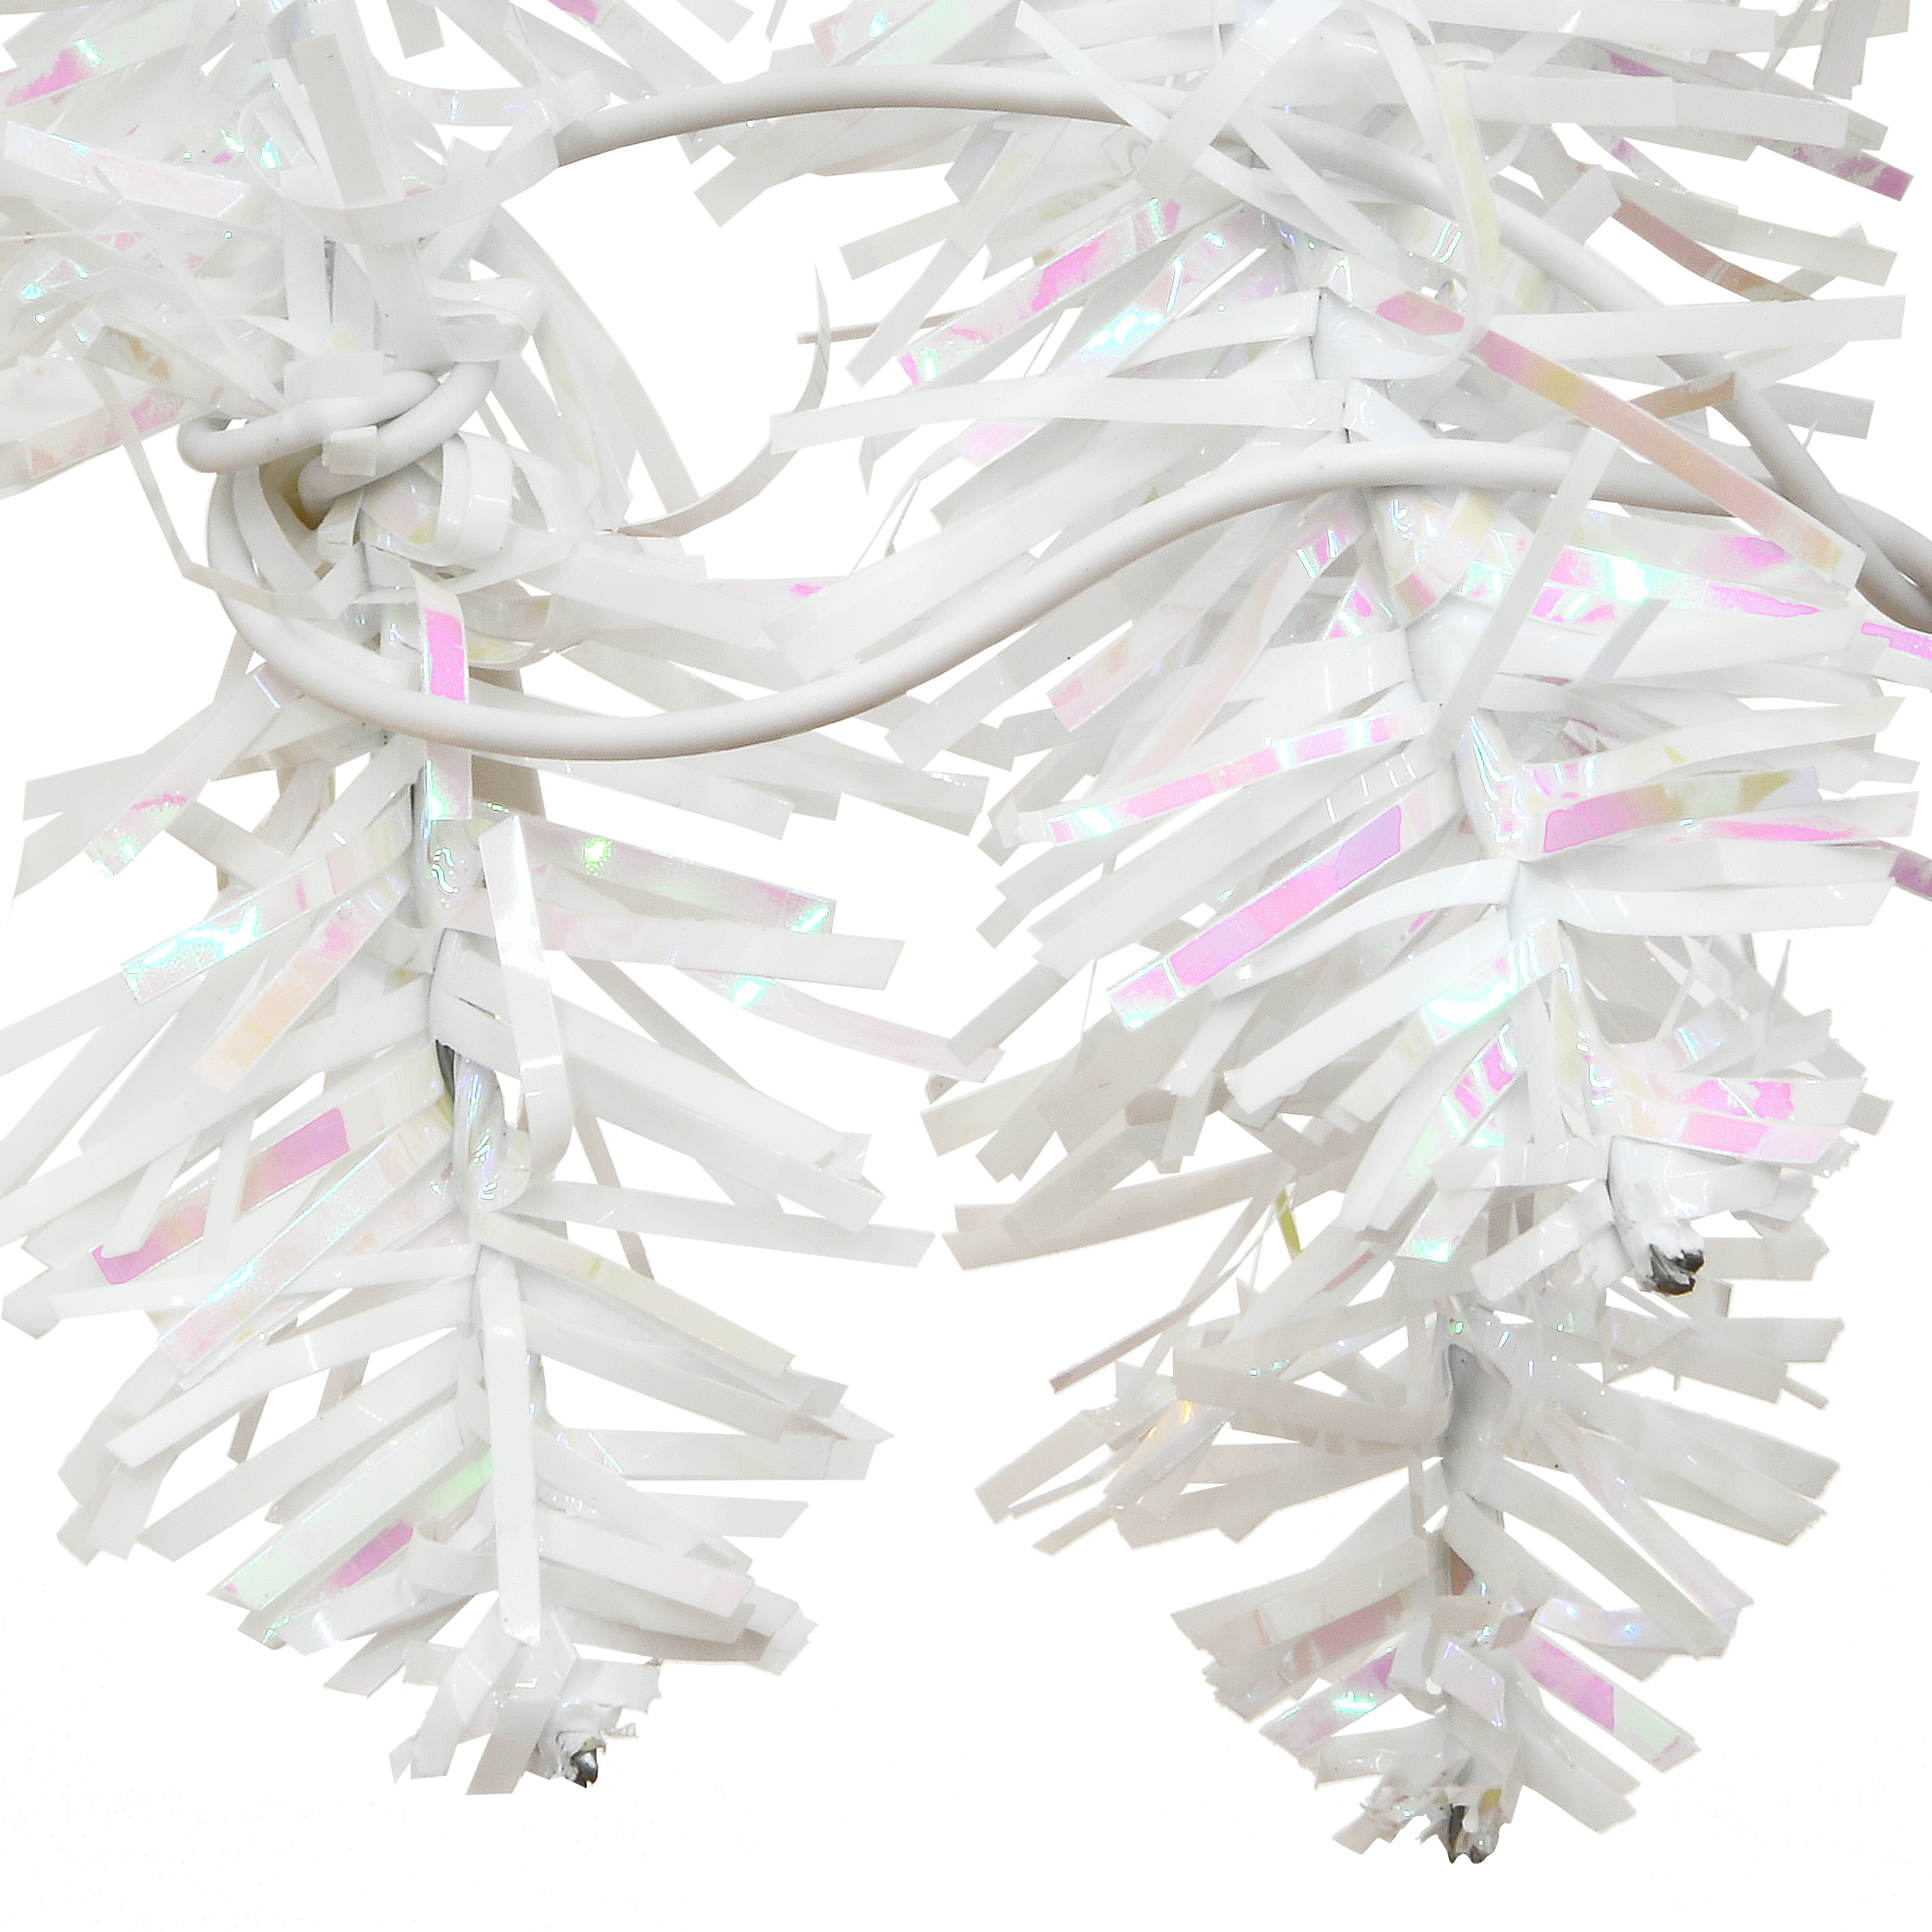 National Tree Company Pre-Lit Artificial Christmas Tree, White Tinsel, White Lights, Includes Stand, 4 feet - image 5 of 6